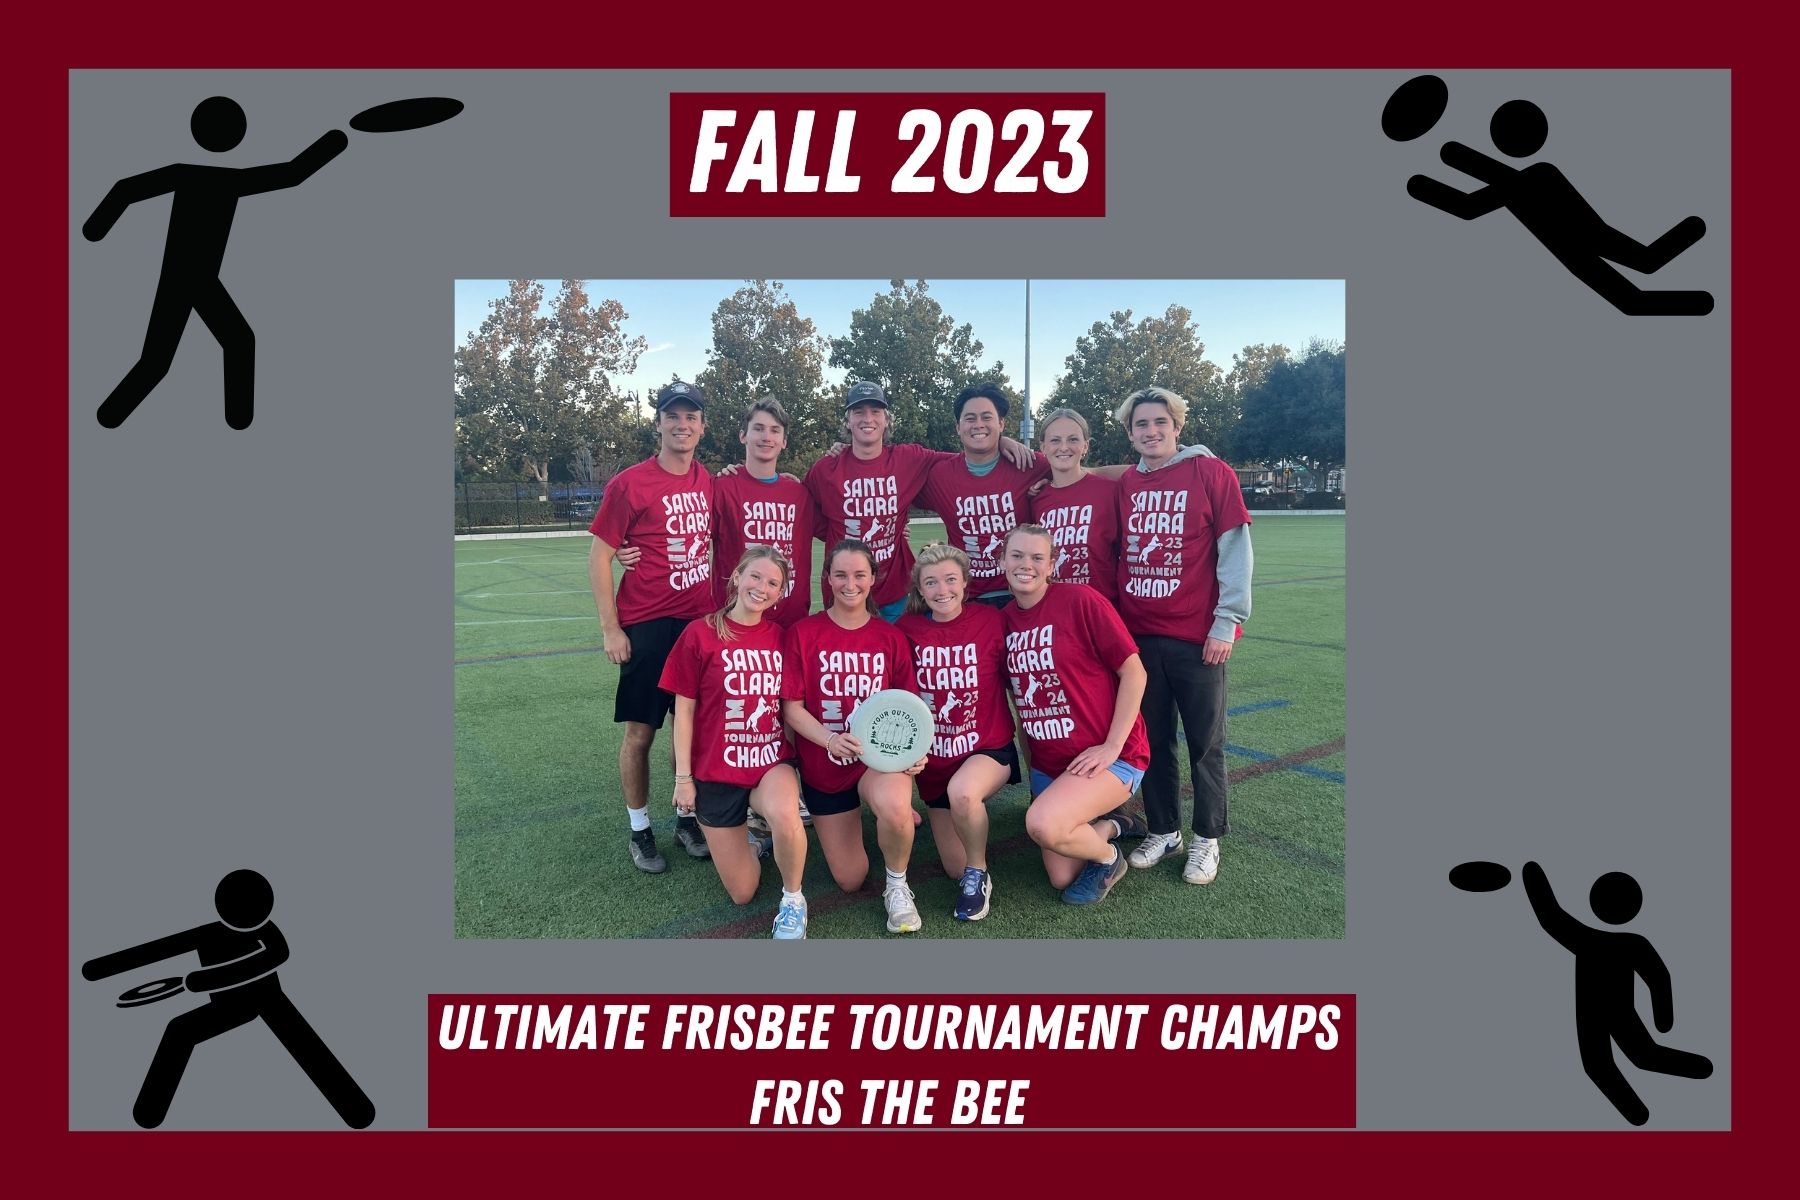 Photo of ultimate frisbee tournament champions, Fris The Bee, posing with their IM Champ t shirts and a frisbee